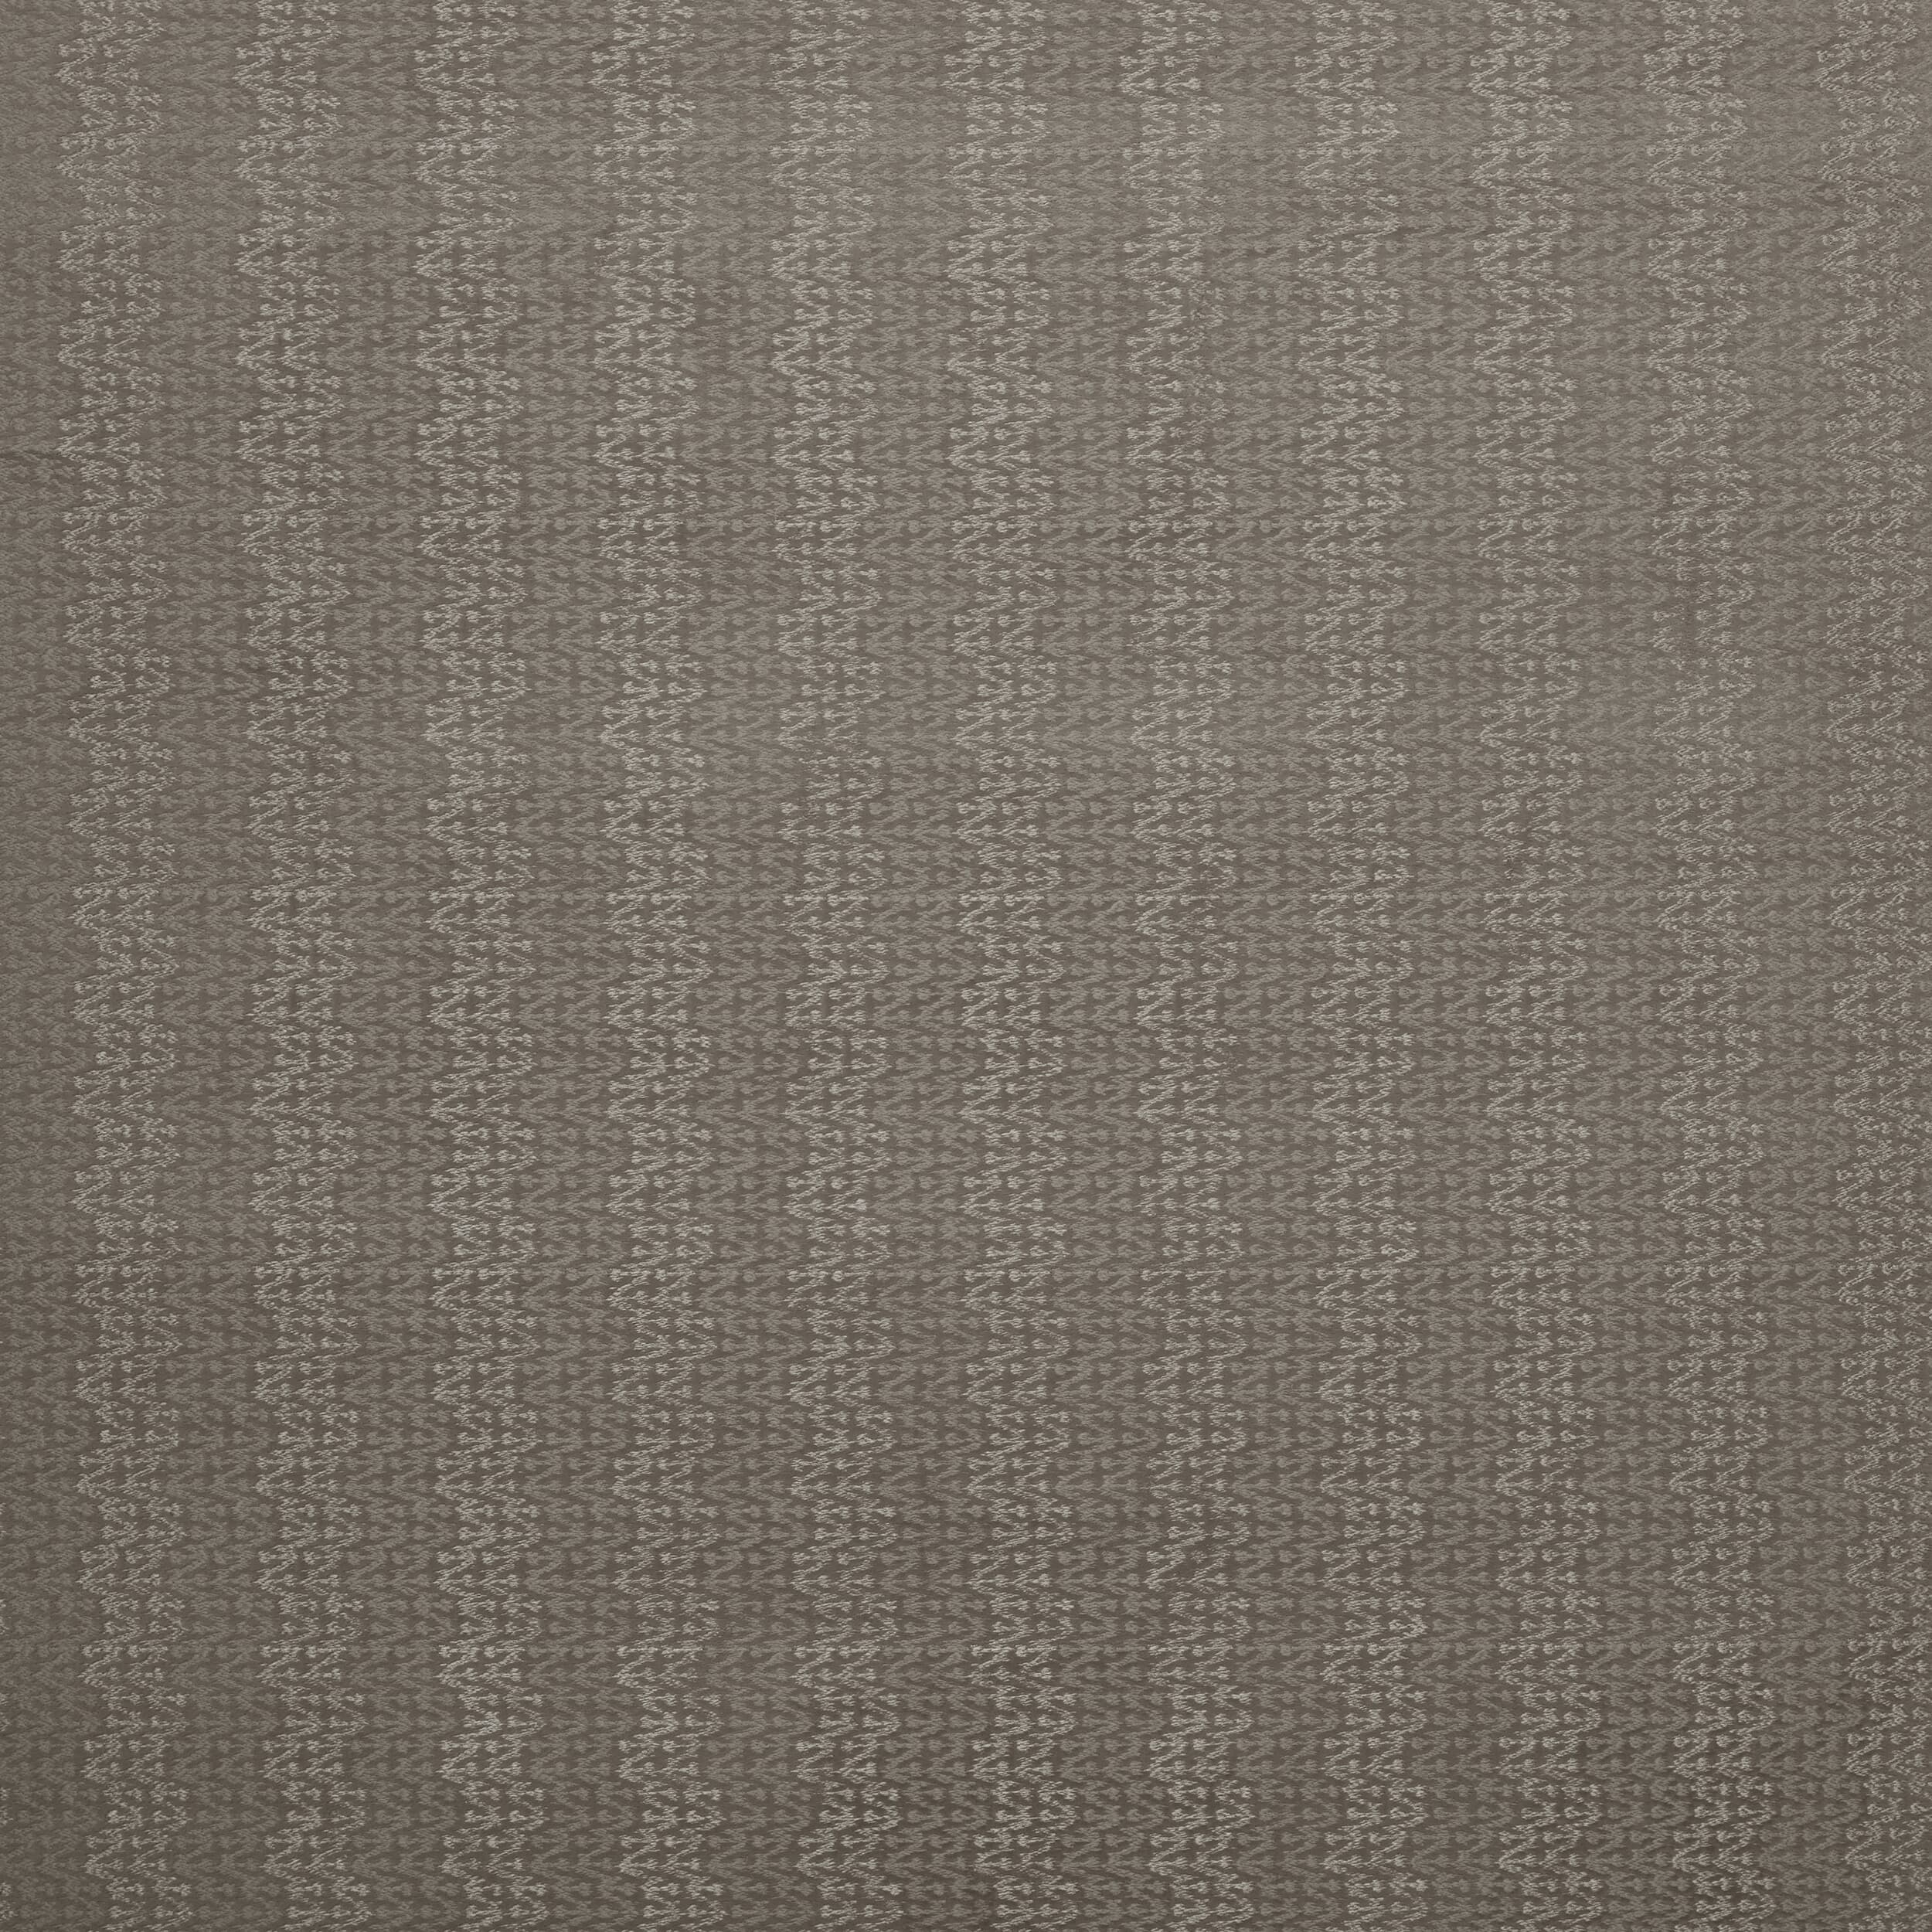 Ferel 6 Charcoal by Stout Fabric